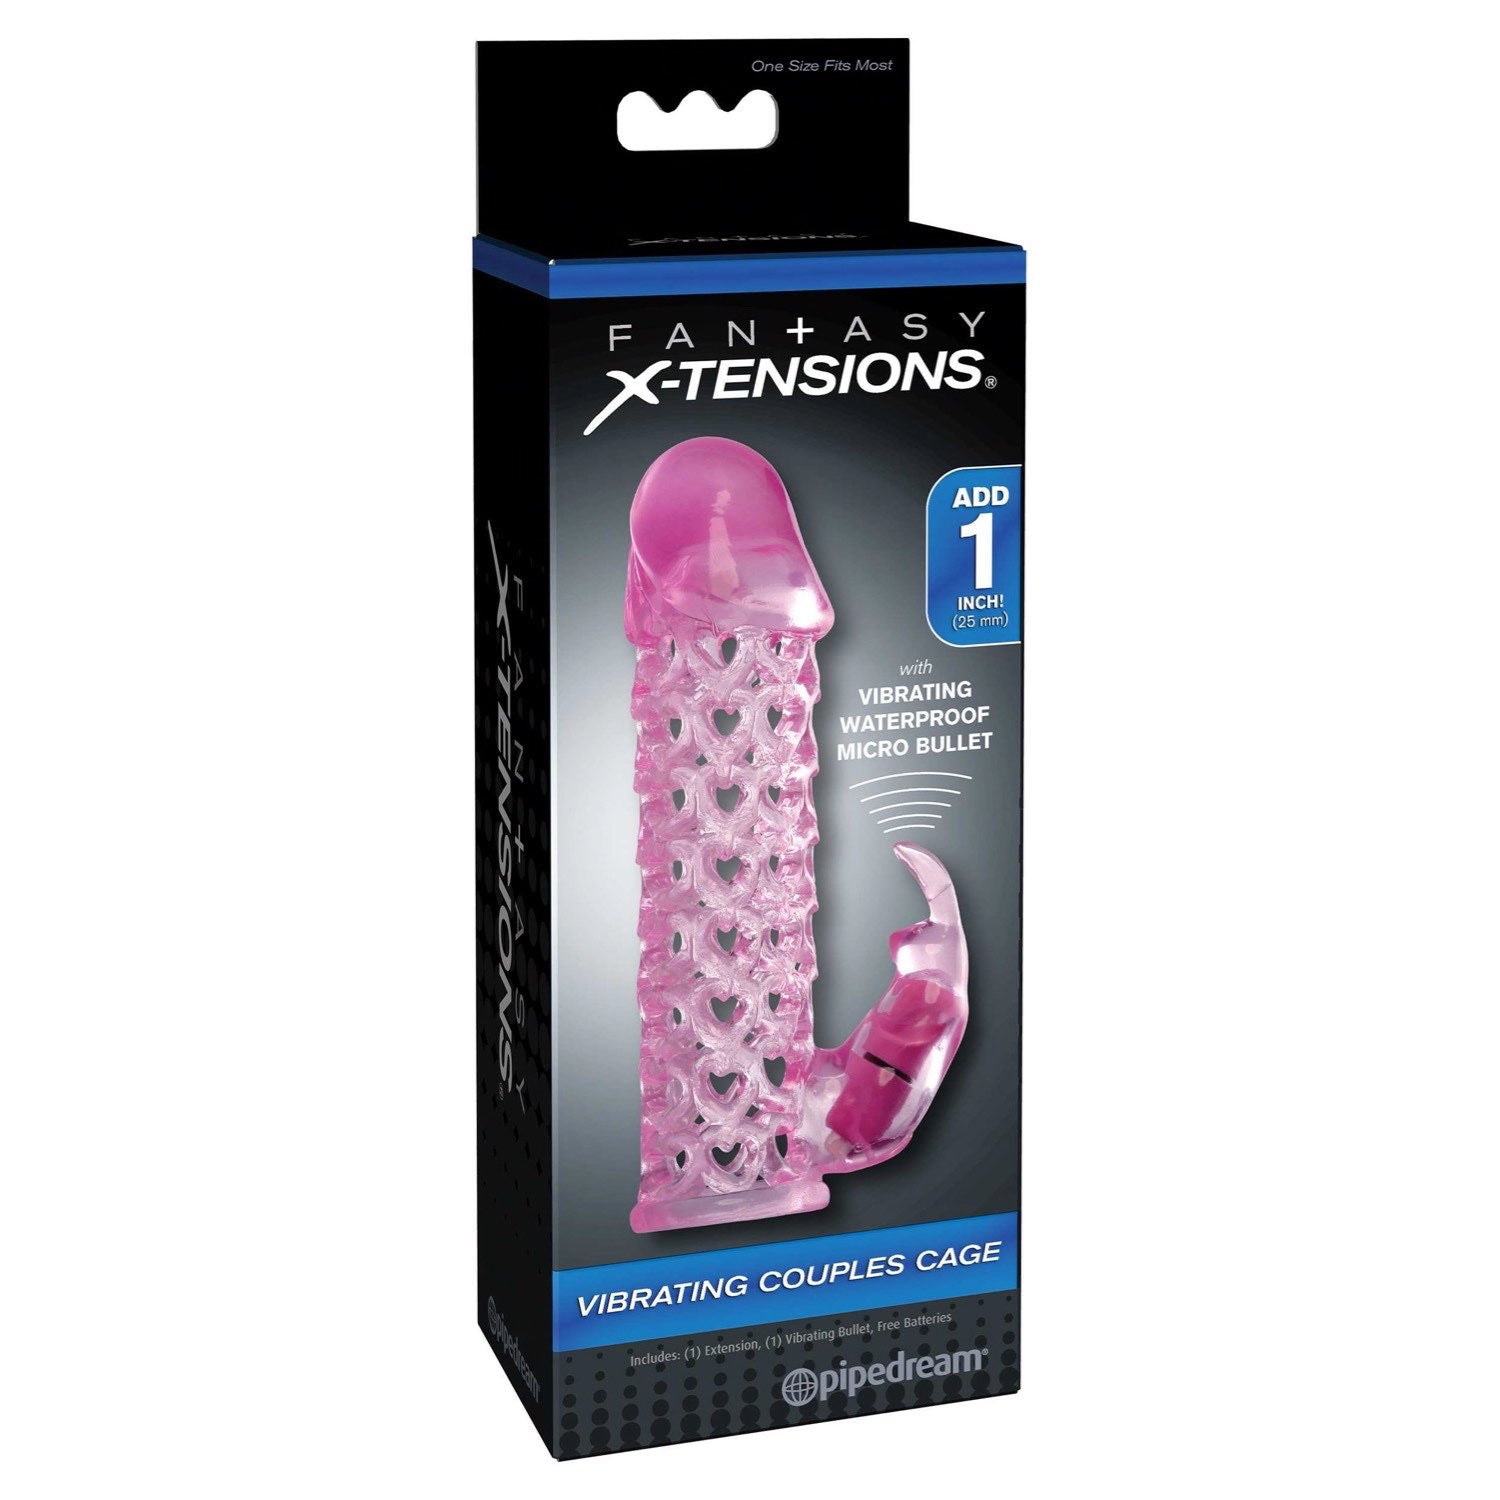 Fantasy X-Tensions Vibrating Couples Cage - Pink Penis Extension Sleeve with Vibrating Rabbit Clit Stimulator by Pipedream